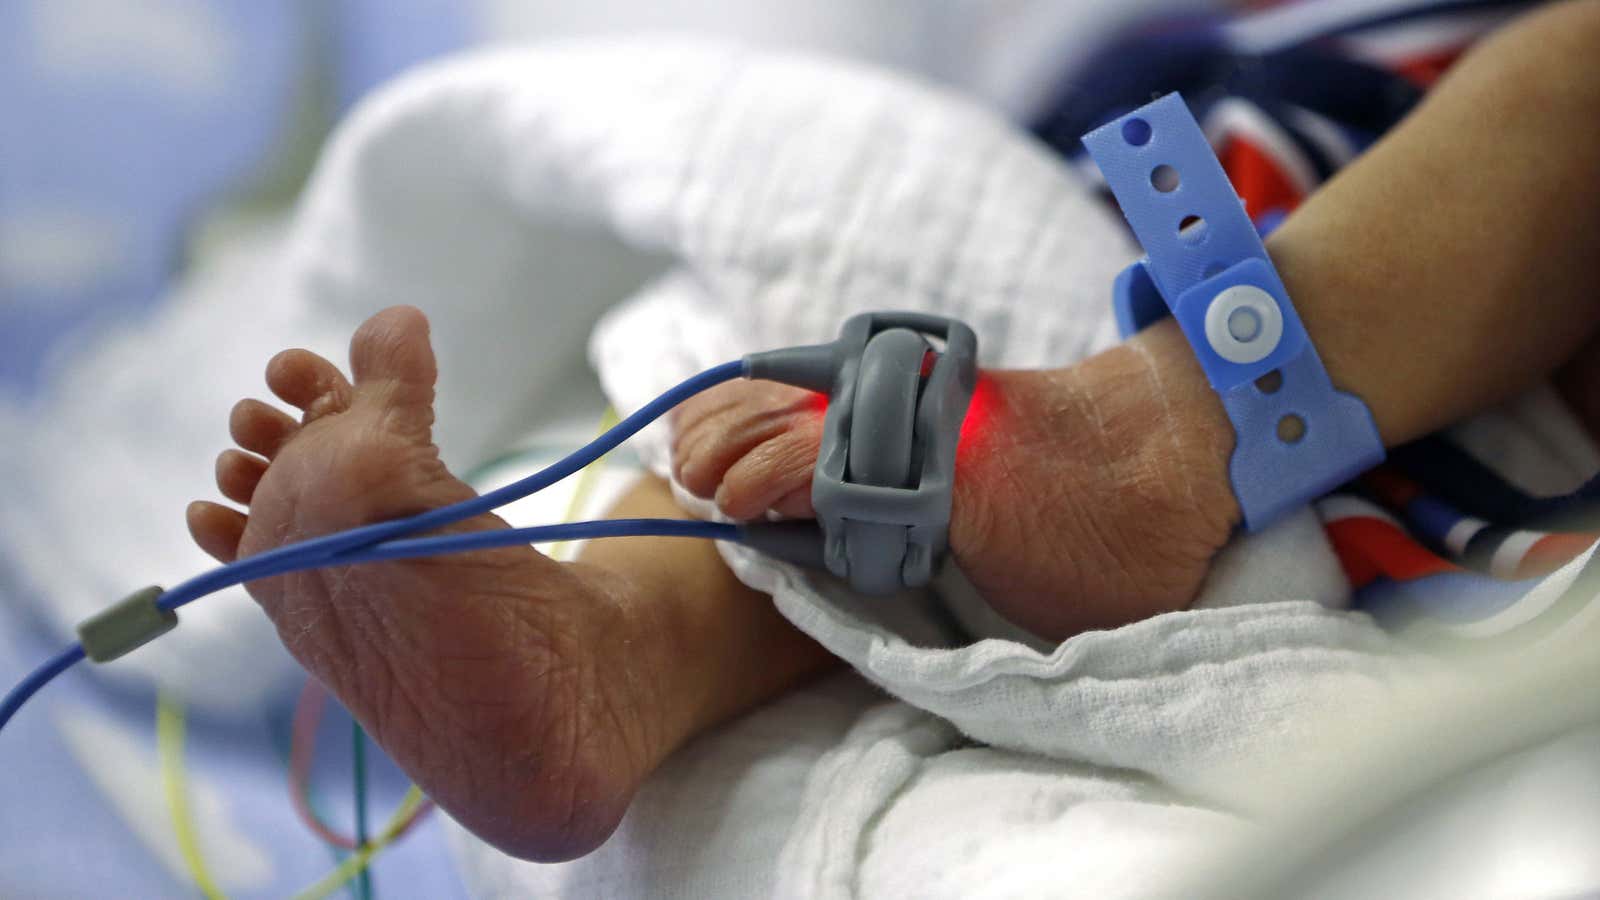 Preterm babies could continue to grow in a womb-like environment.